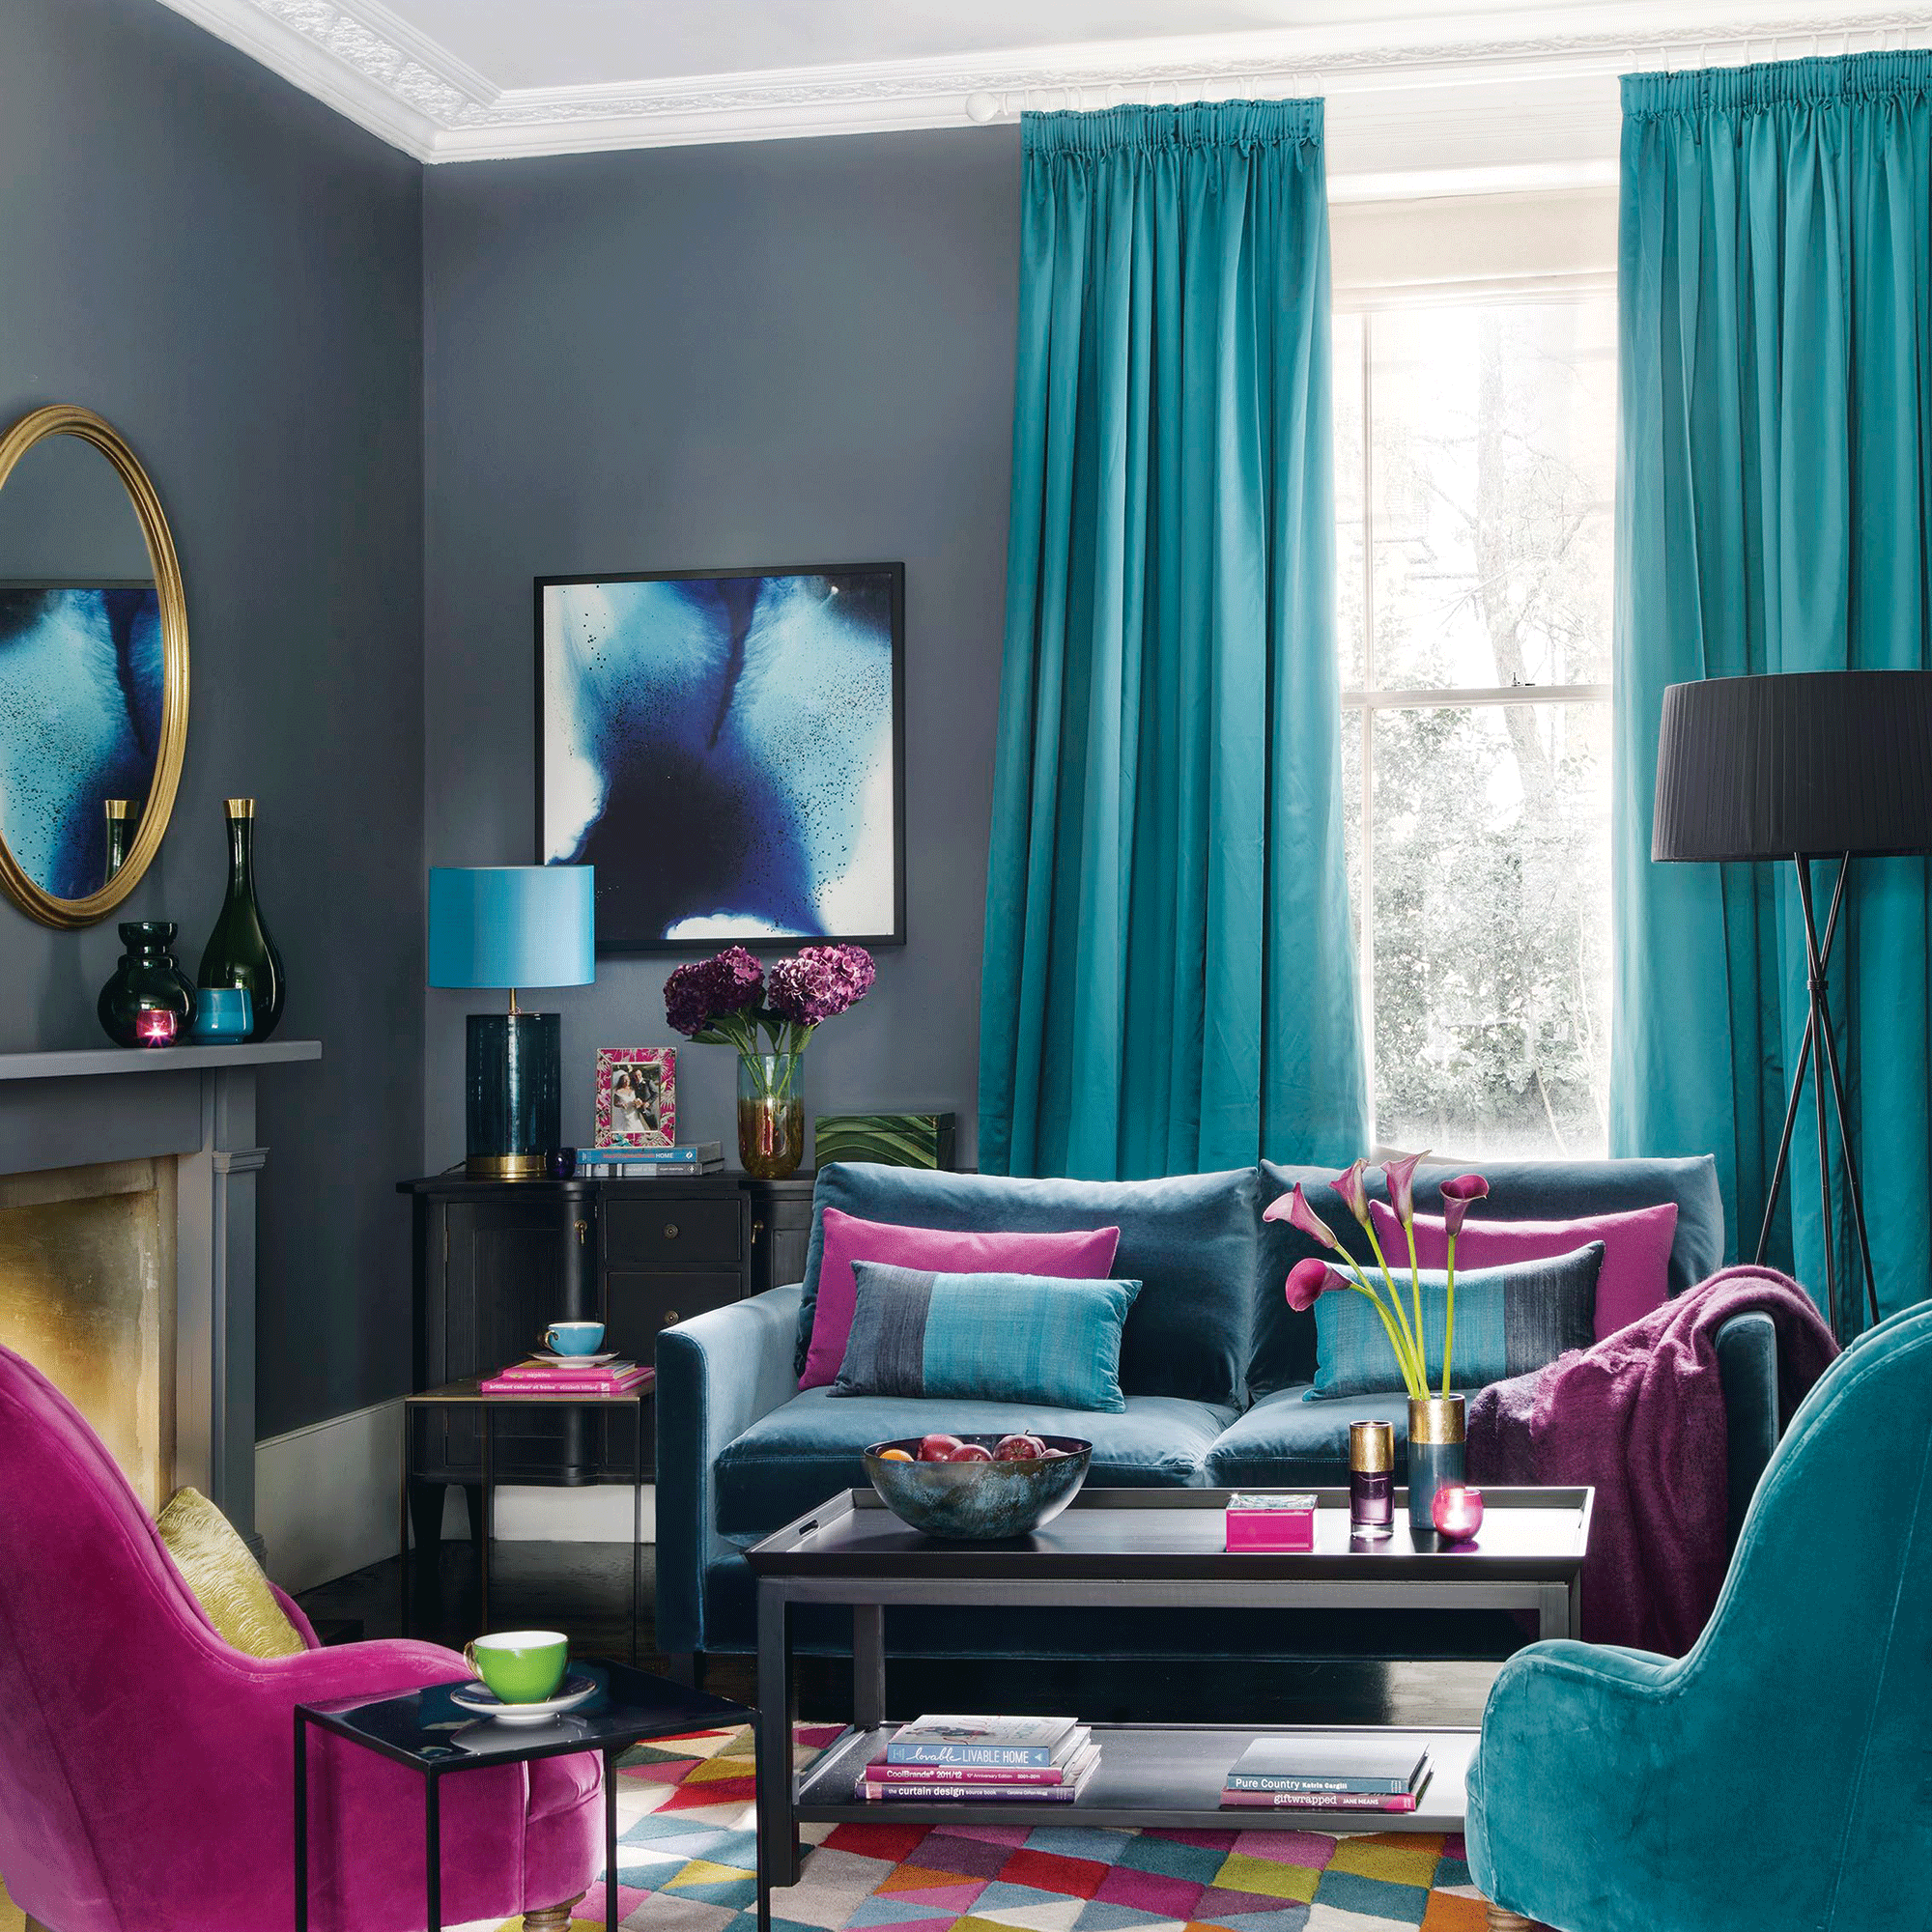 Turquoise curtains with dark living room